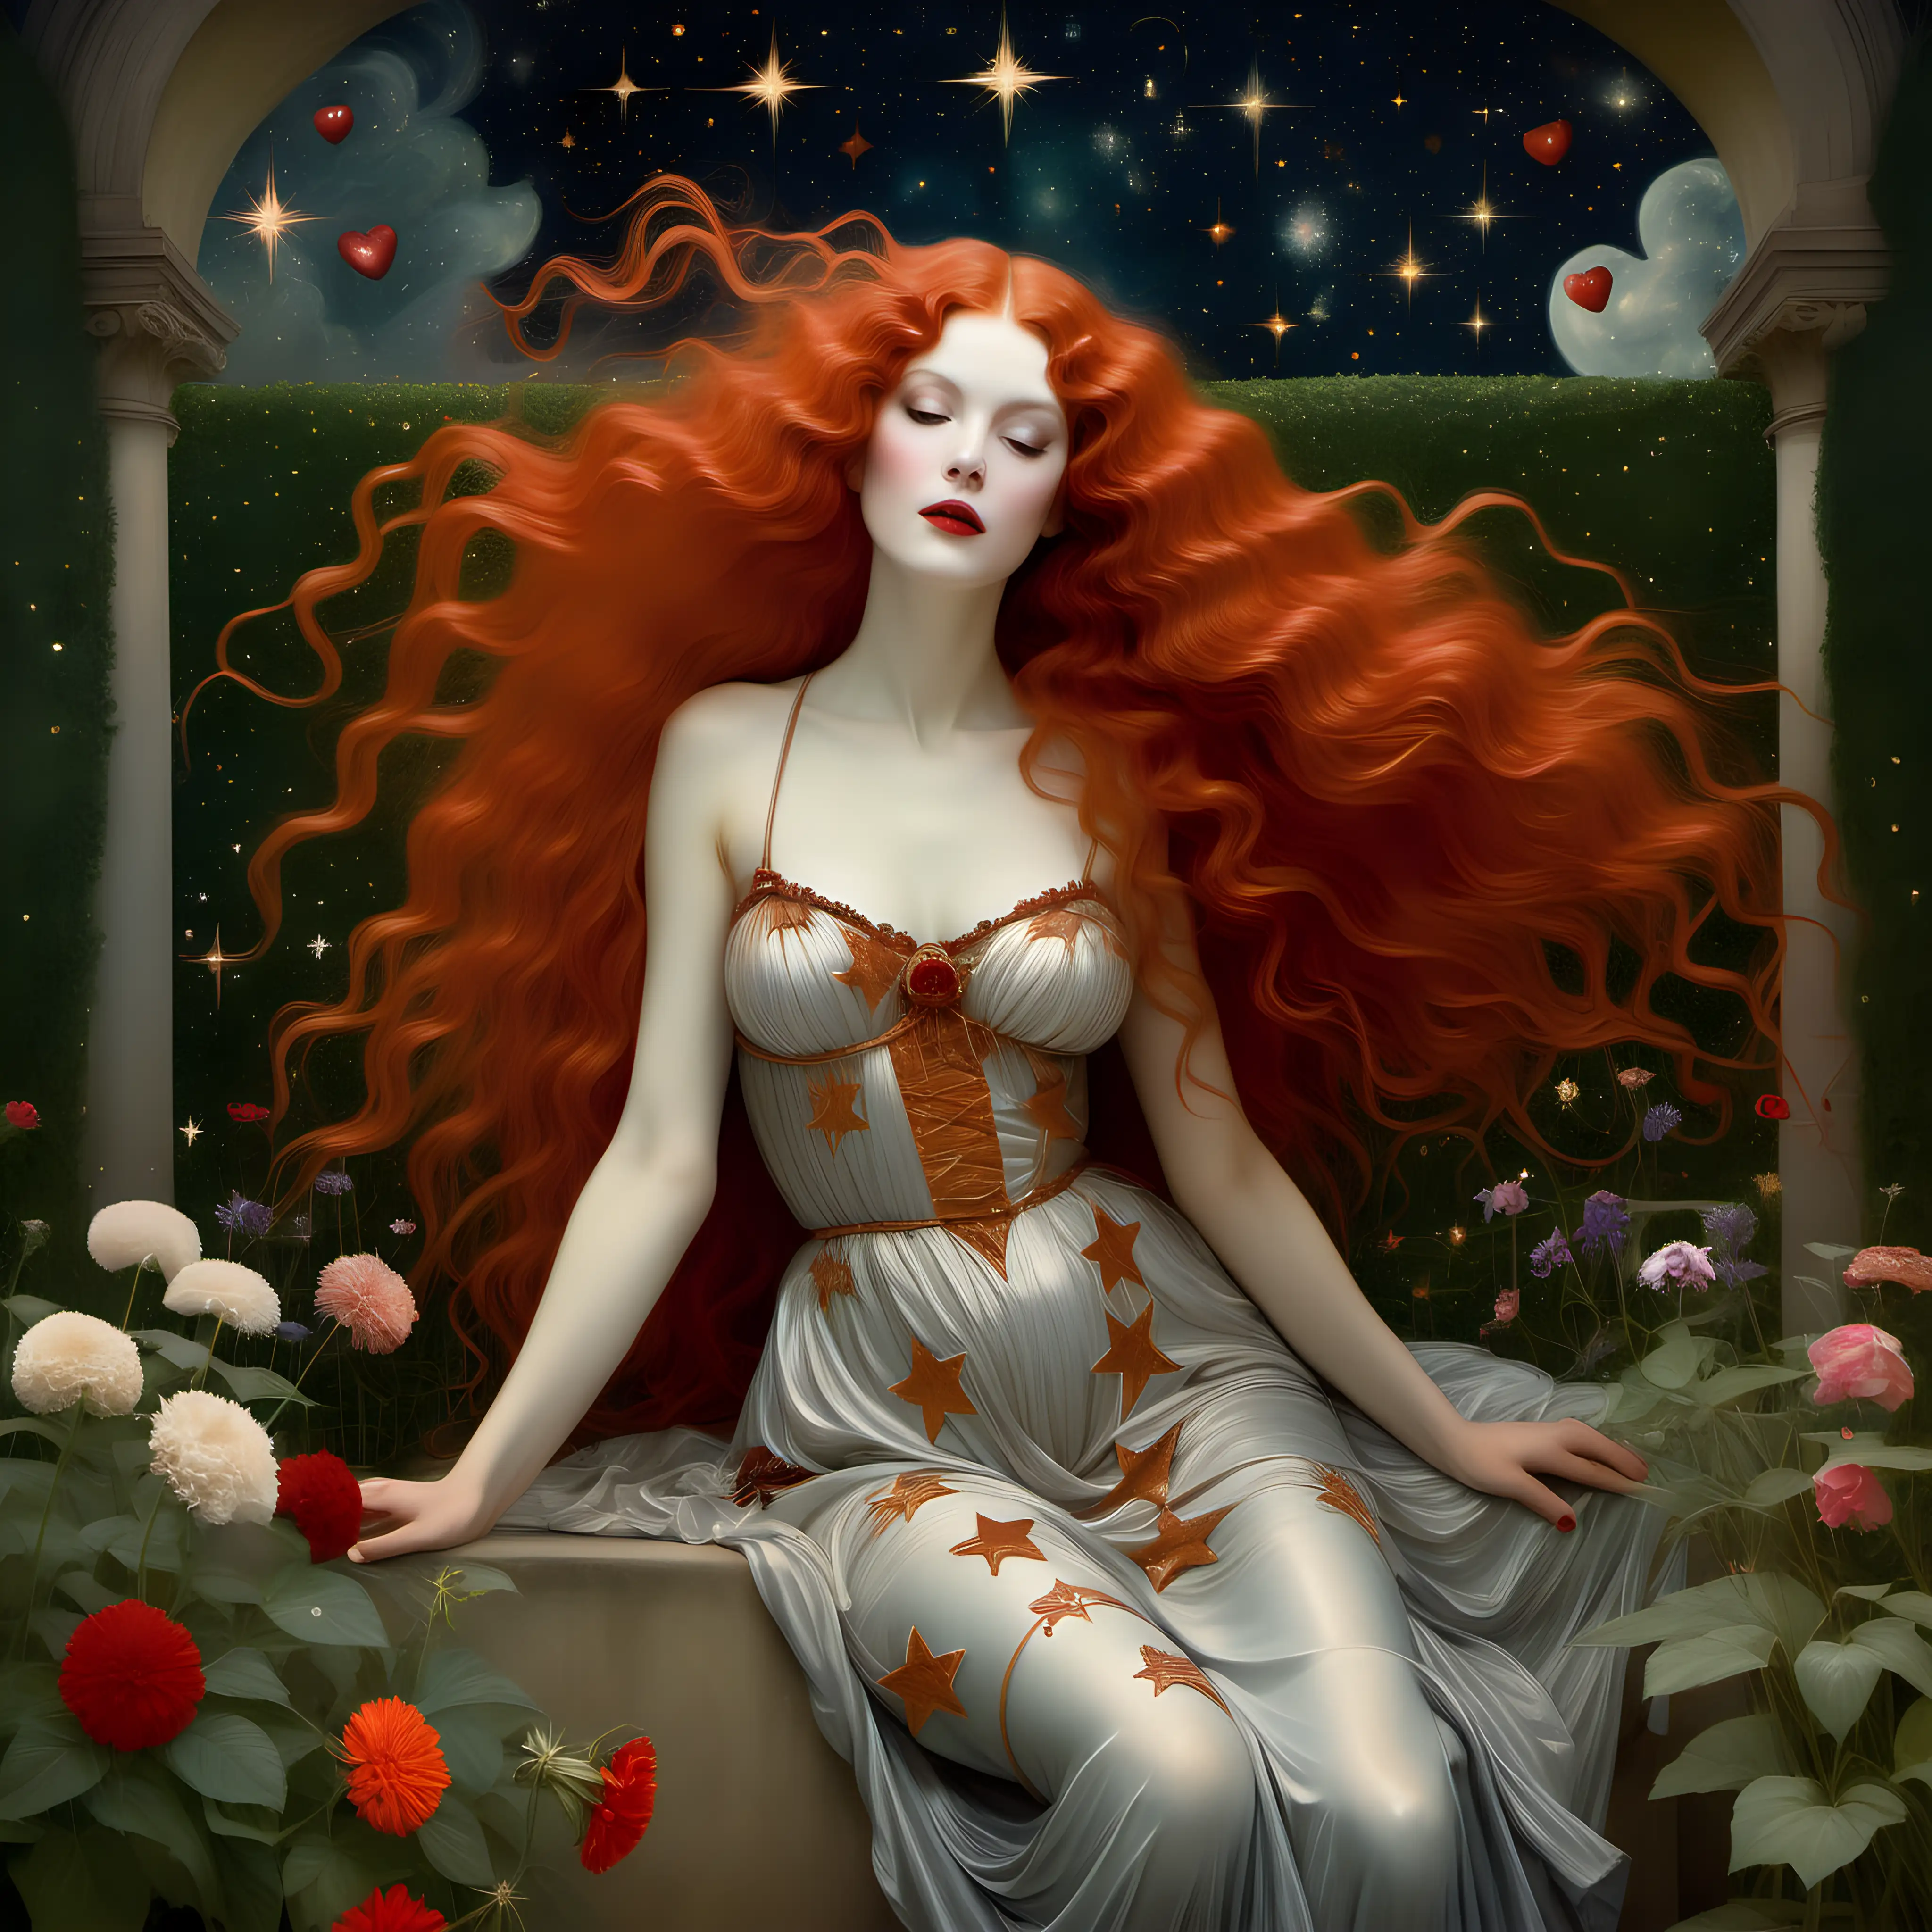 Enchanting Woman with Long Red Hair in a Romantic Garden